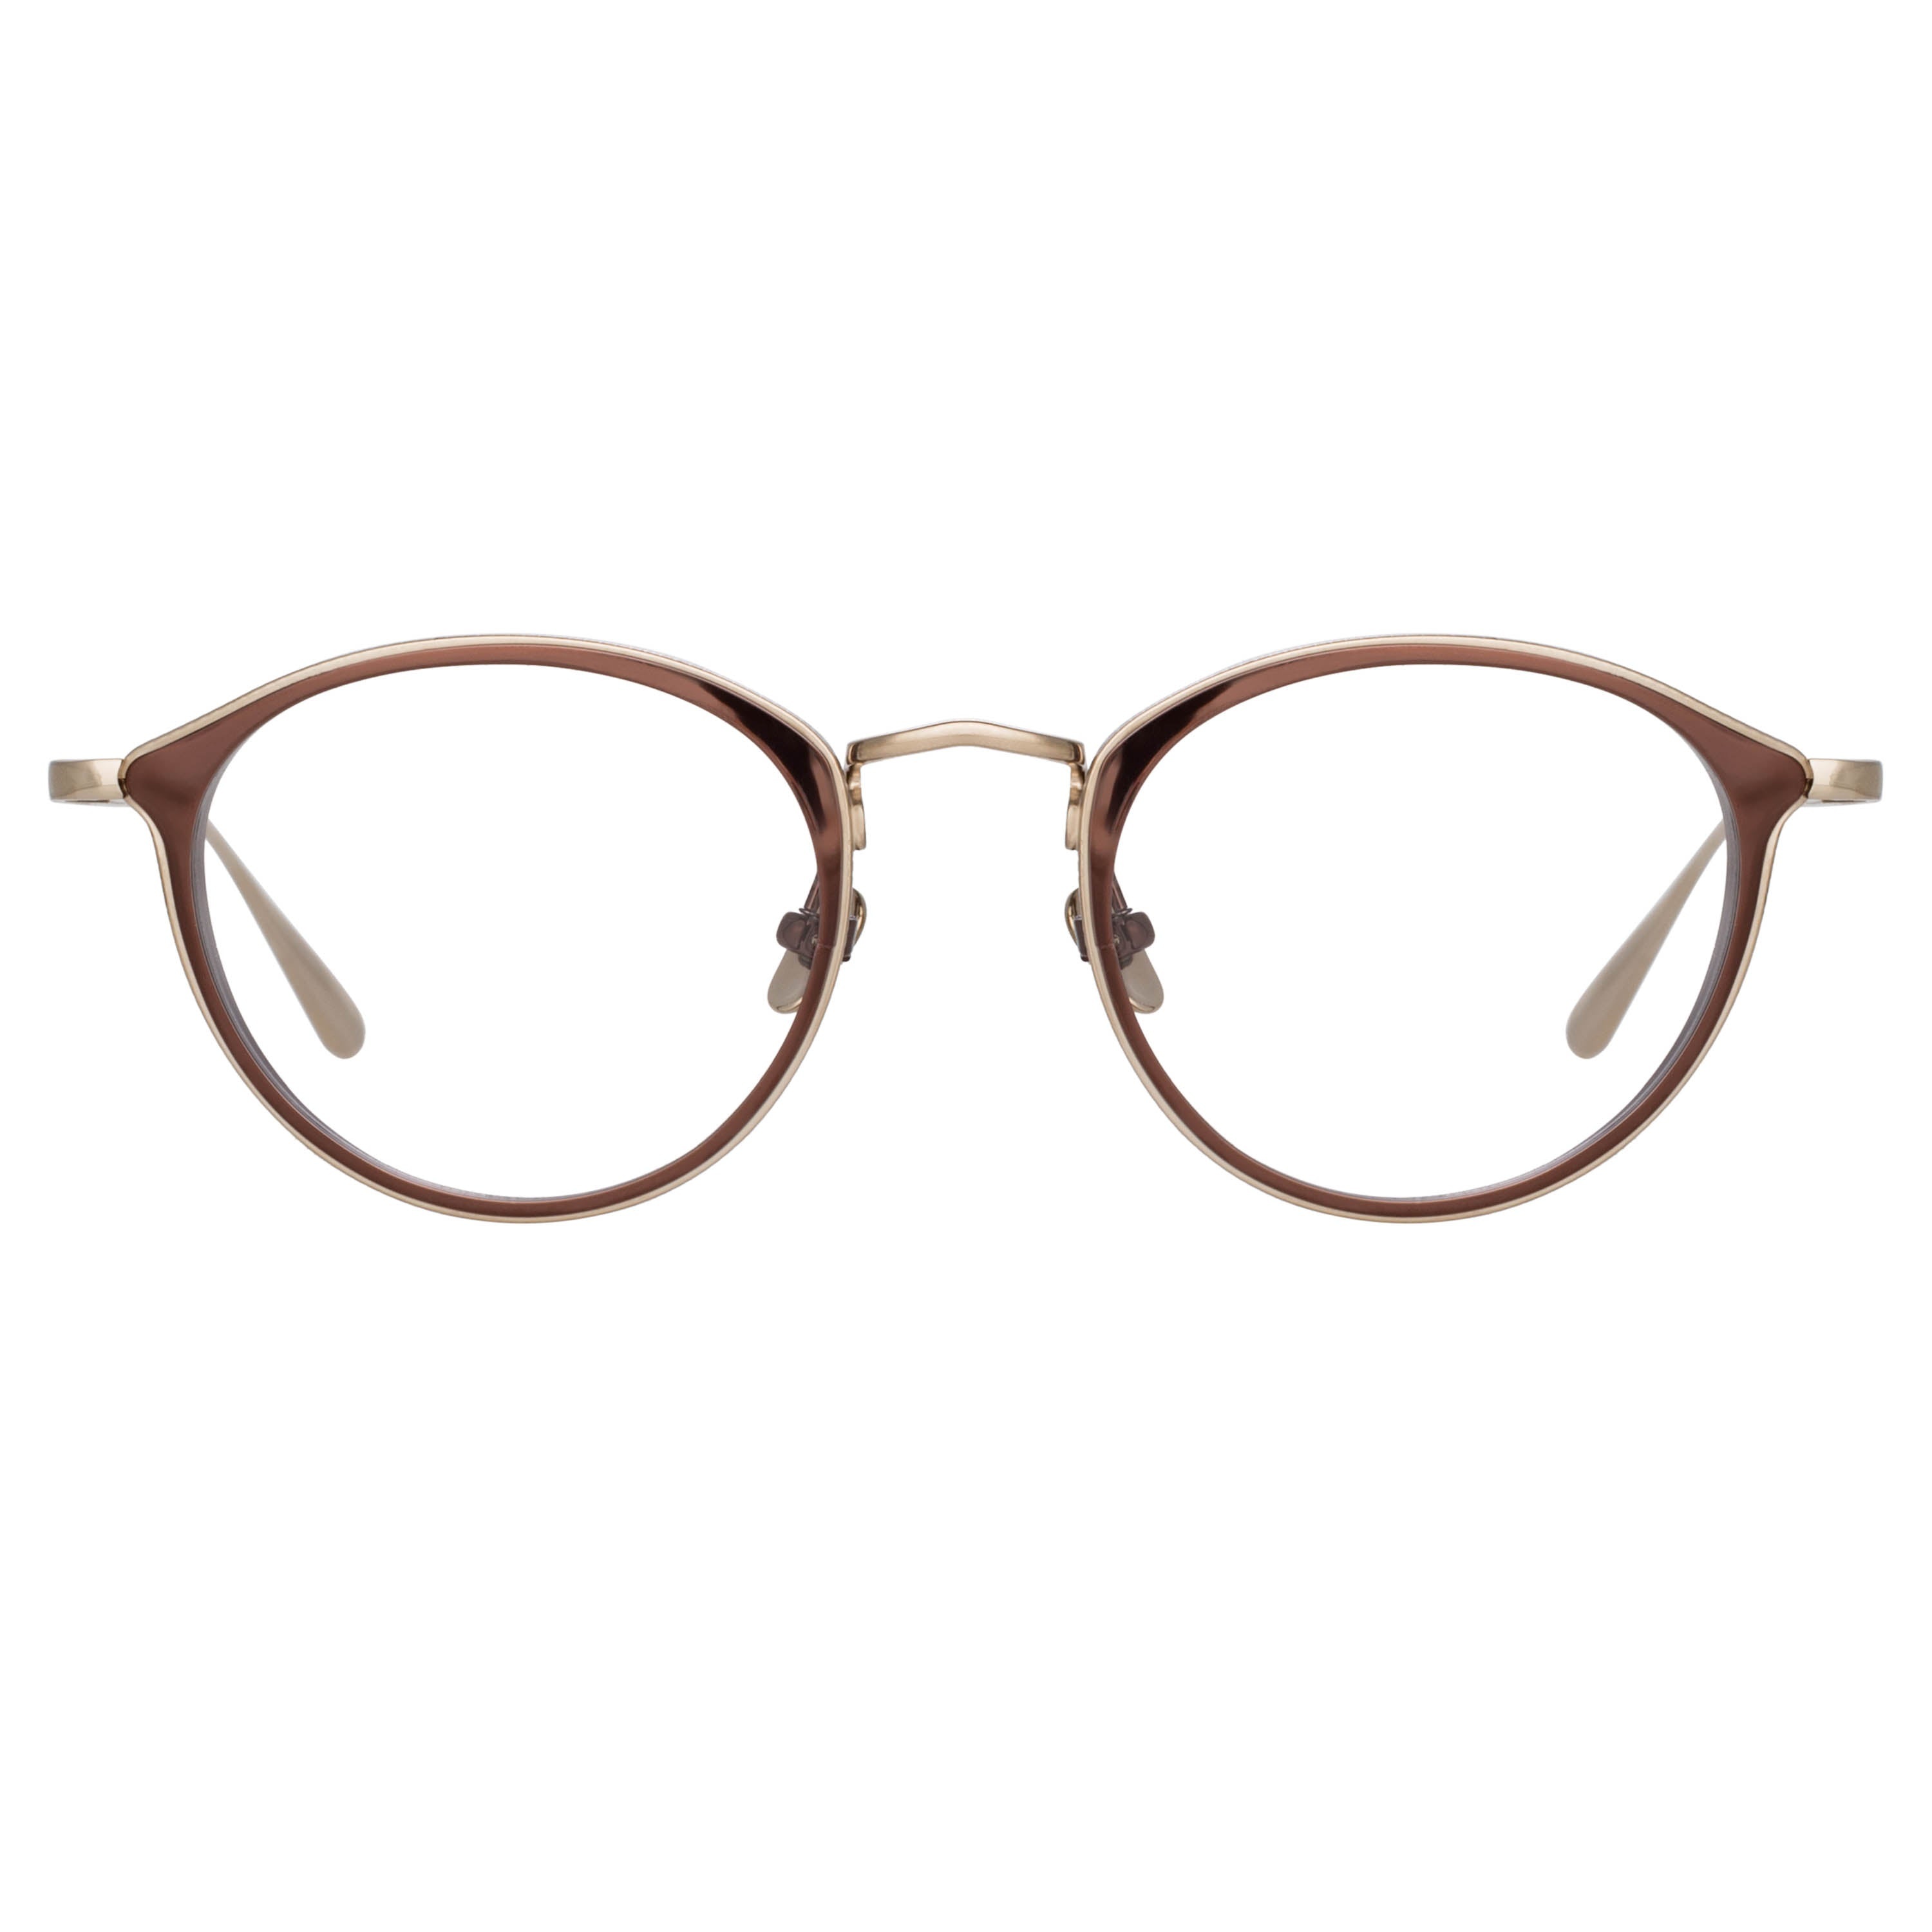 LUIS OVAL OPTICAL FRAME IN LIGHT GOLD AND BROWN - 1